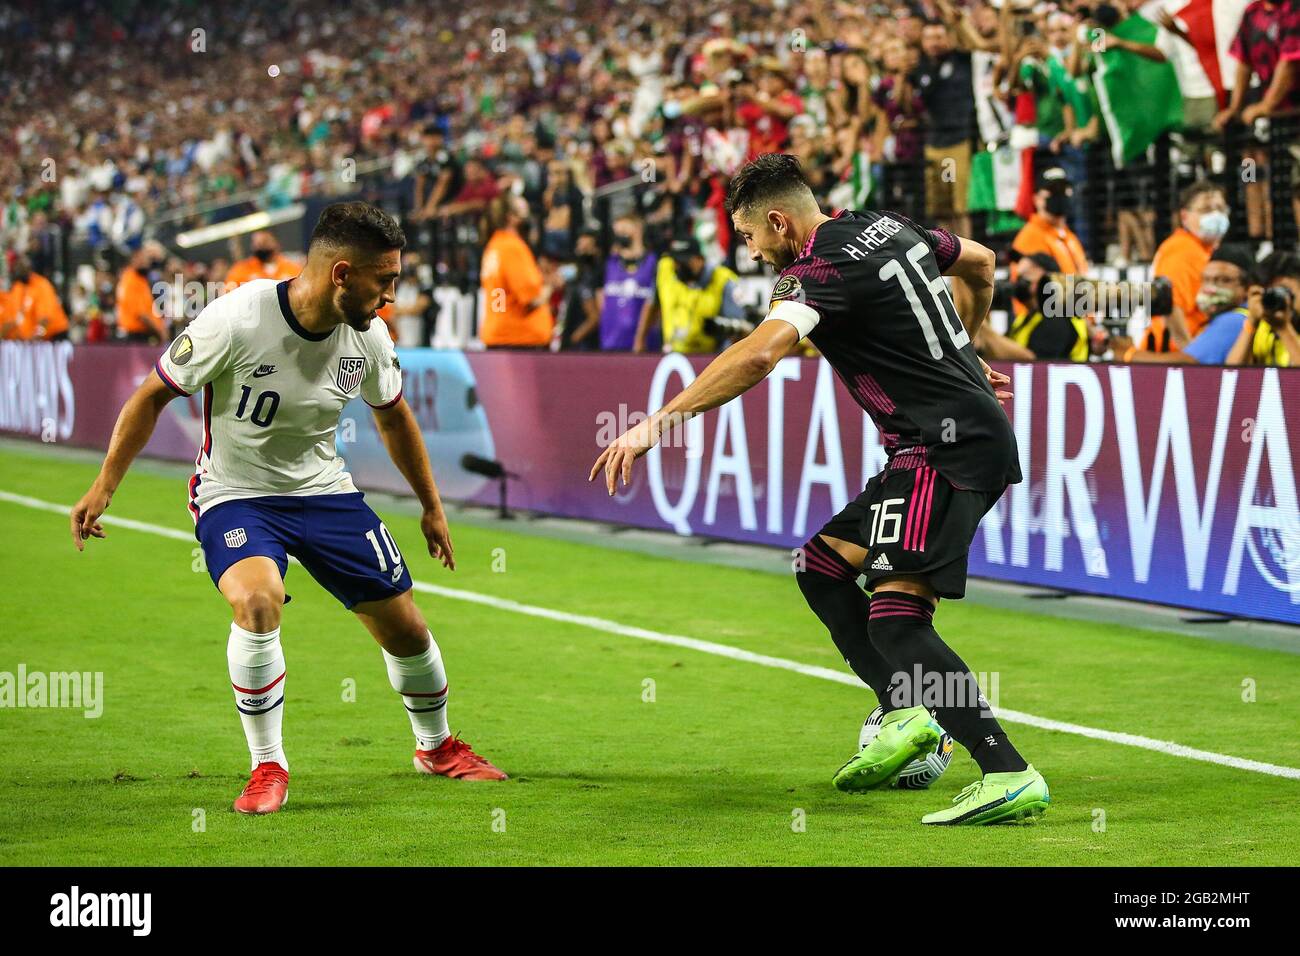 August 1, 2021: Mexico midfielder Héctor Herrera (16) is defended by United States midfielder Cristian Roldan (10) during the CONCACAF Gold Cup 2021 Final featuring the United States and Mexico at Allegiant Stadium in Las Vegas, NV. The United States defeated Mexico in extra-time 1-0. Christopher Trim/CSM. Stock Photo